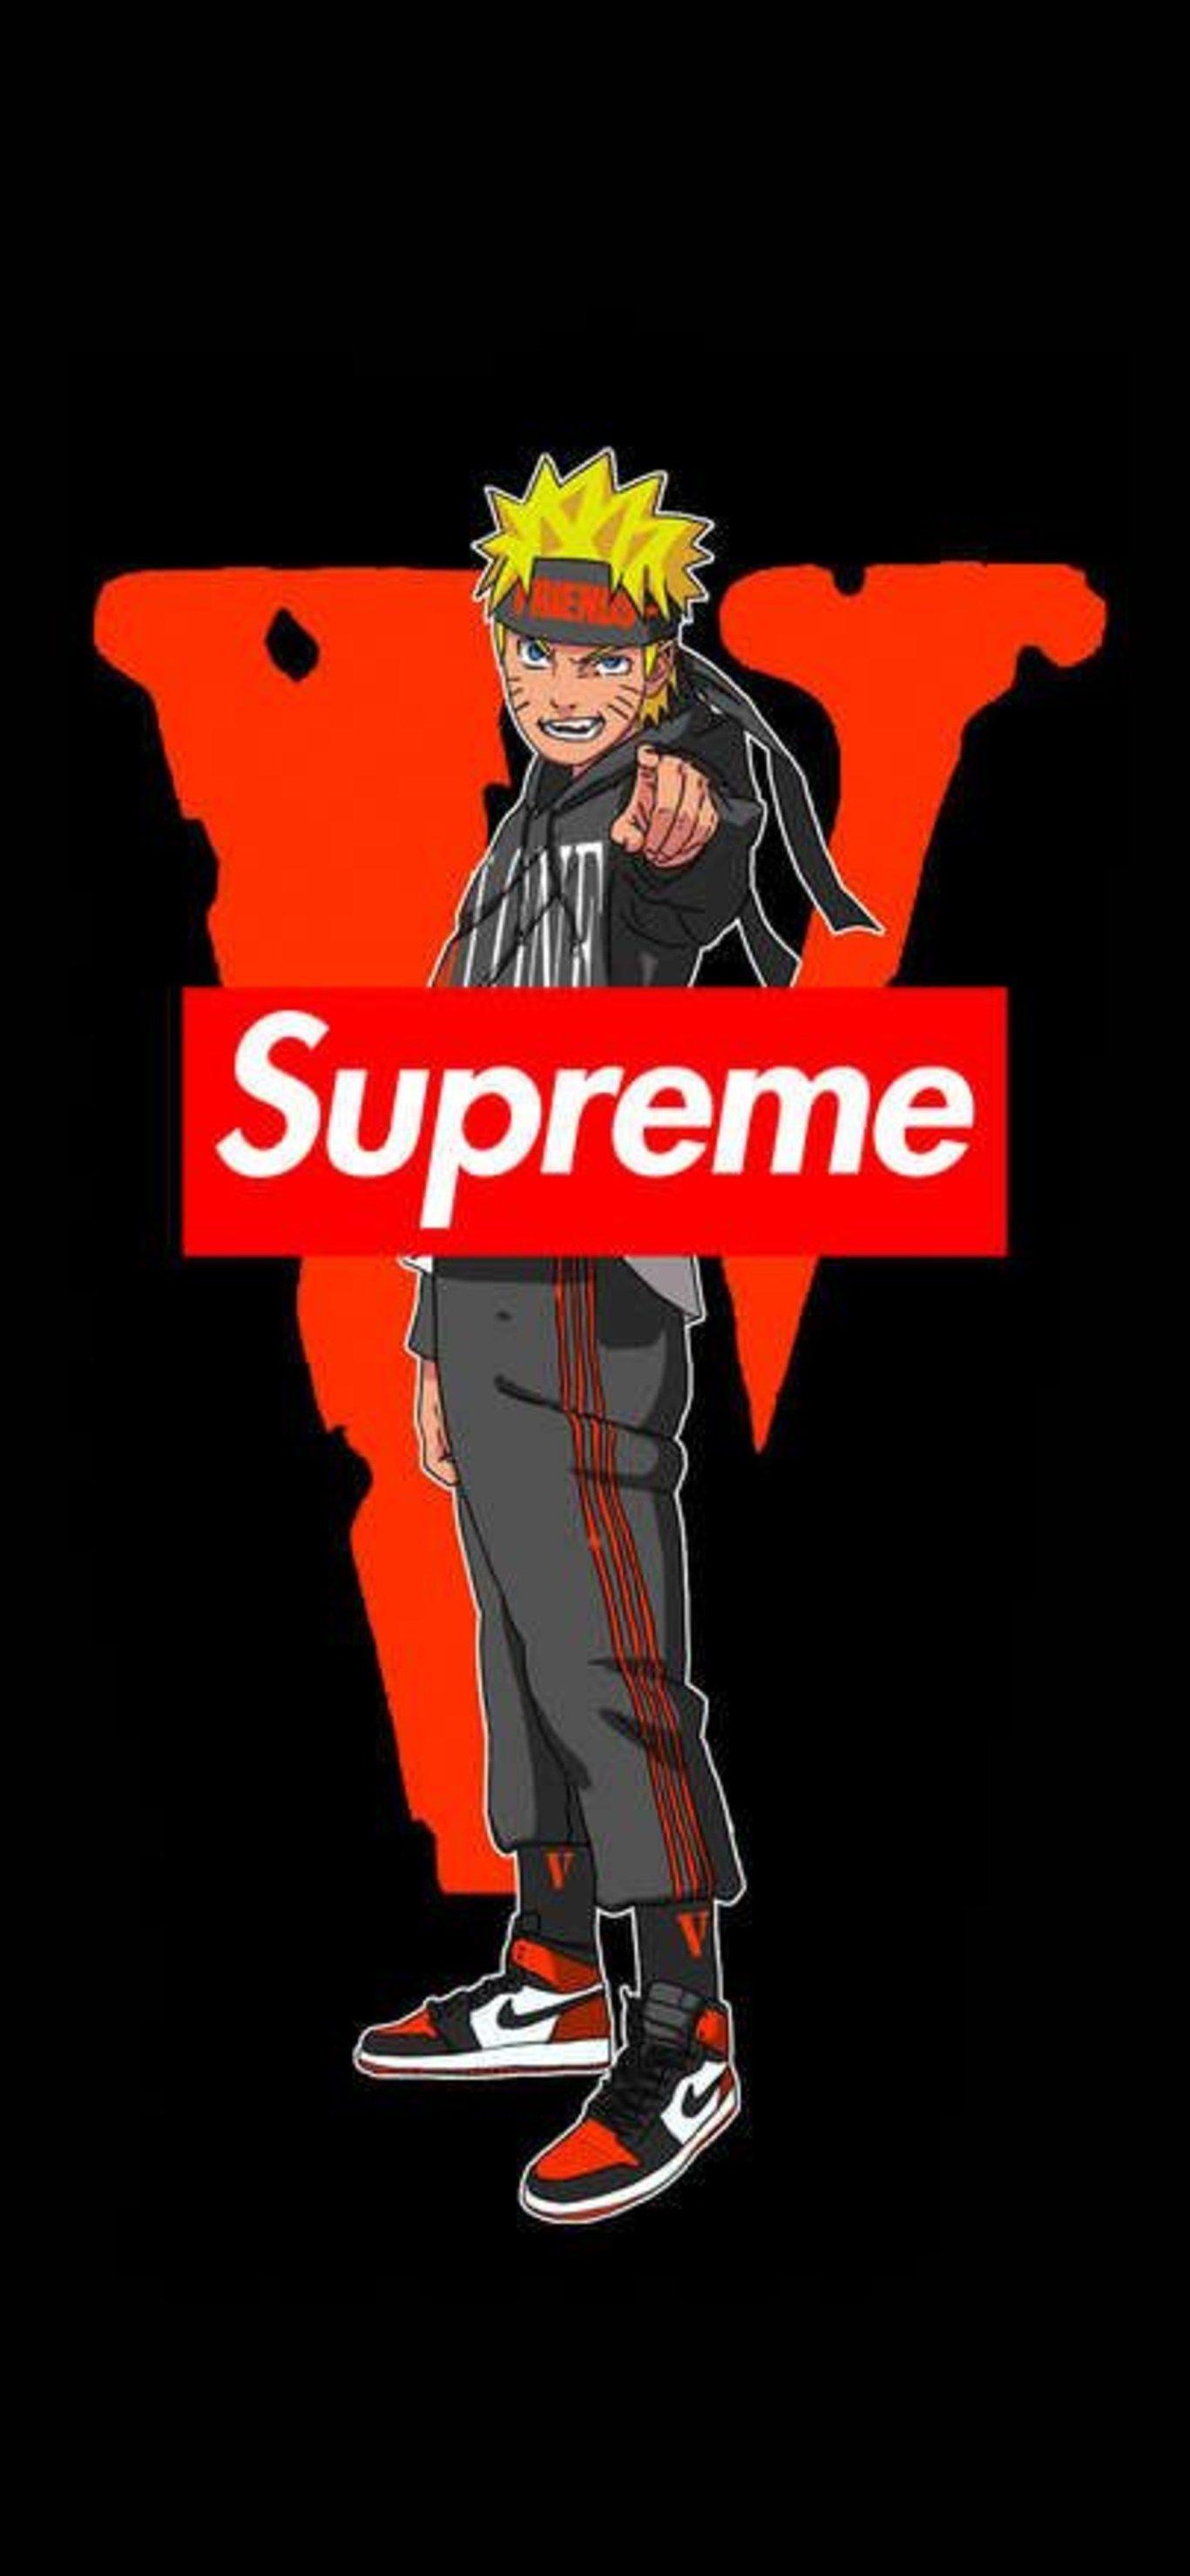 Naruto Supreme Iphone Wallpapers Top Free Naruto Supreme Iphone Backgrounds Wallpaperaccess On them we see the hero of the manga and anime series naruto, dedicated to an orphan boy, persecuted by the inhabitants of his village, as well as their children. naruto supreme iphone wallpapers top